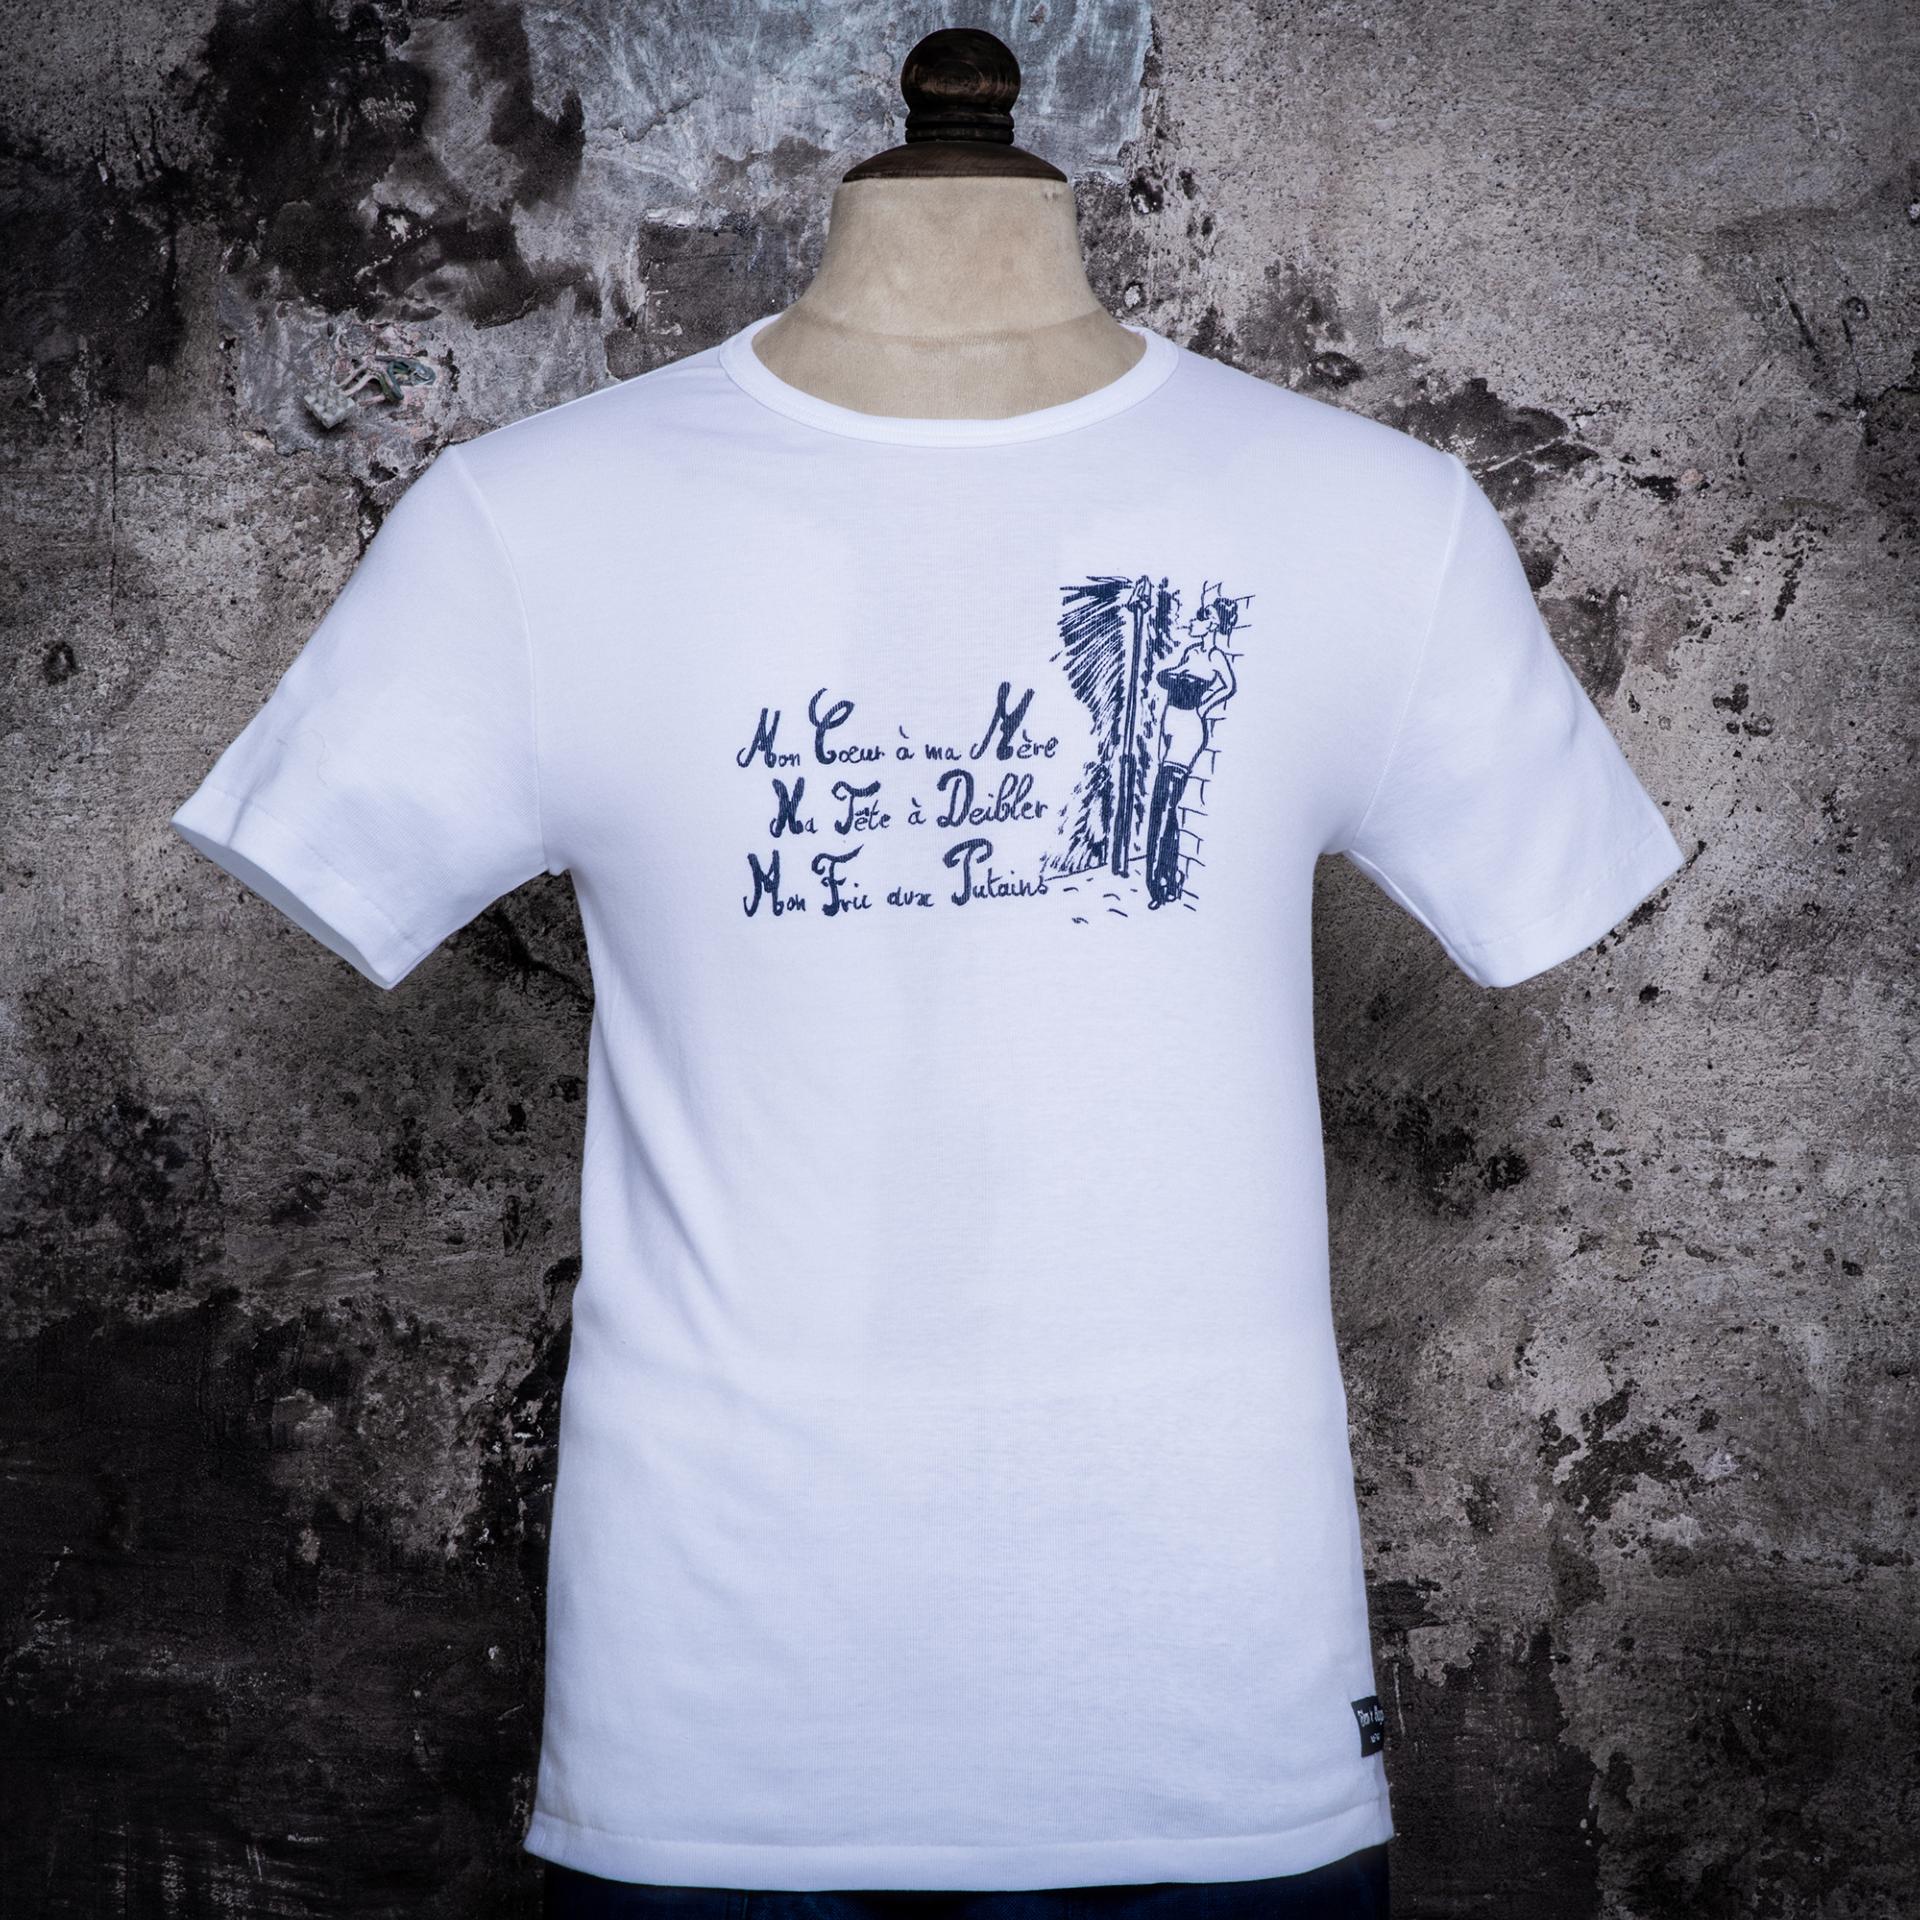 THE TEE "MON FRIC AUX PUTAINS"